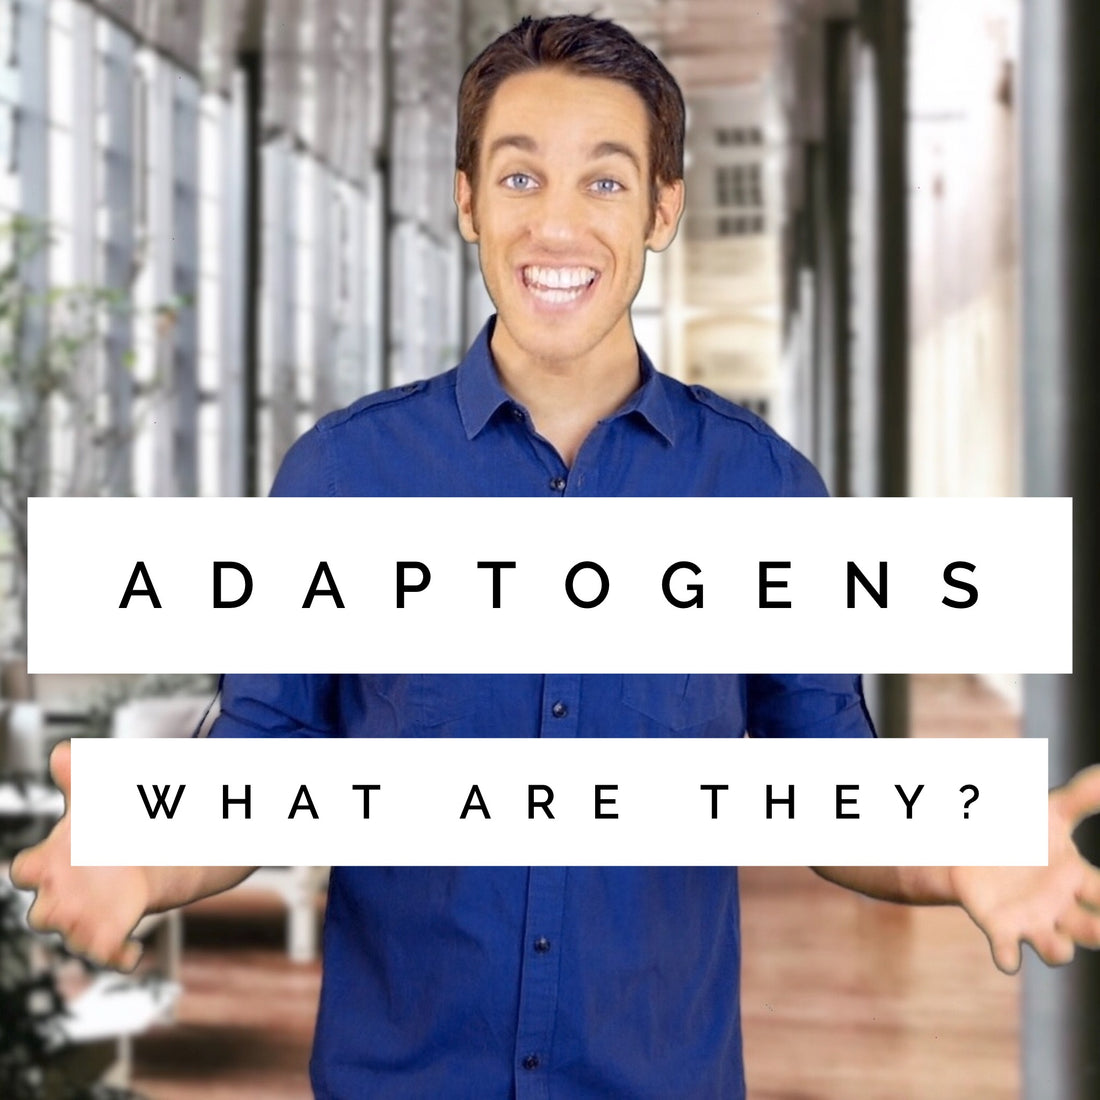 ADAPTOGENS - What Are They